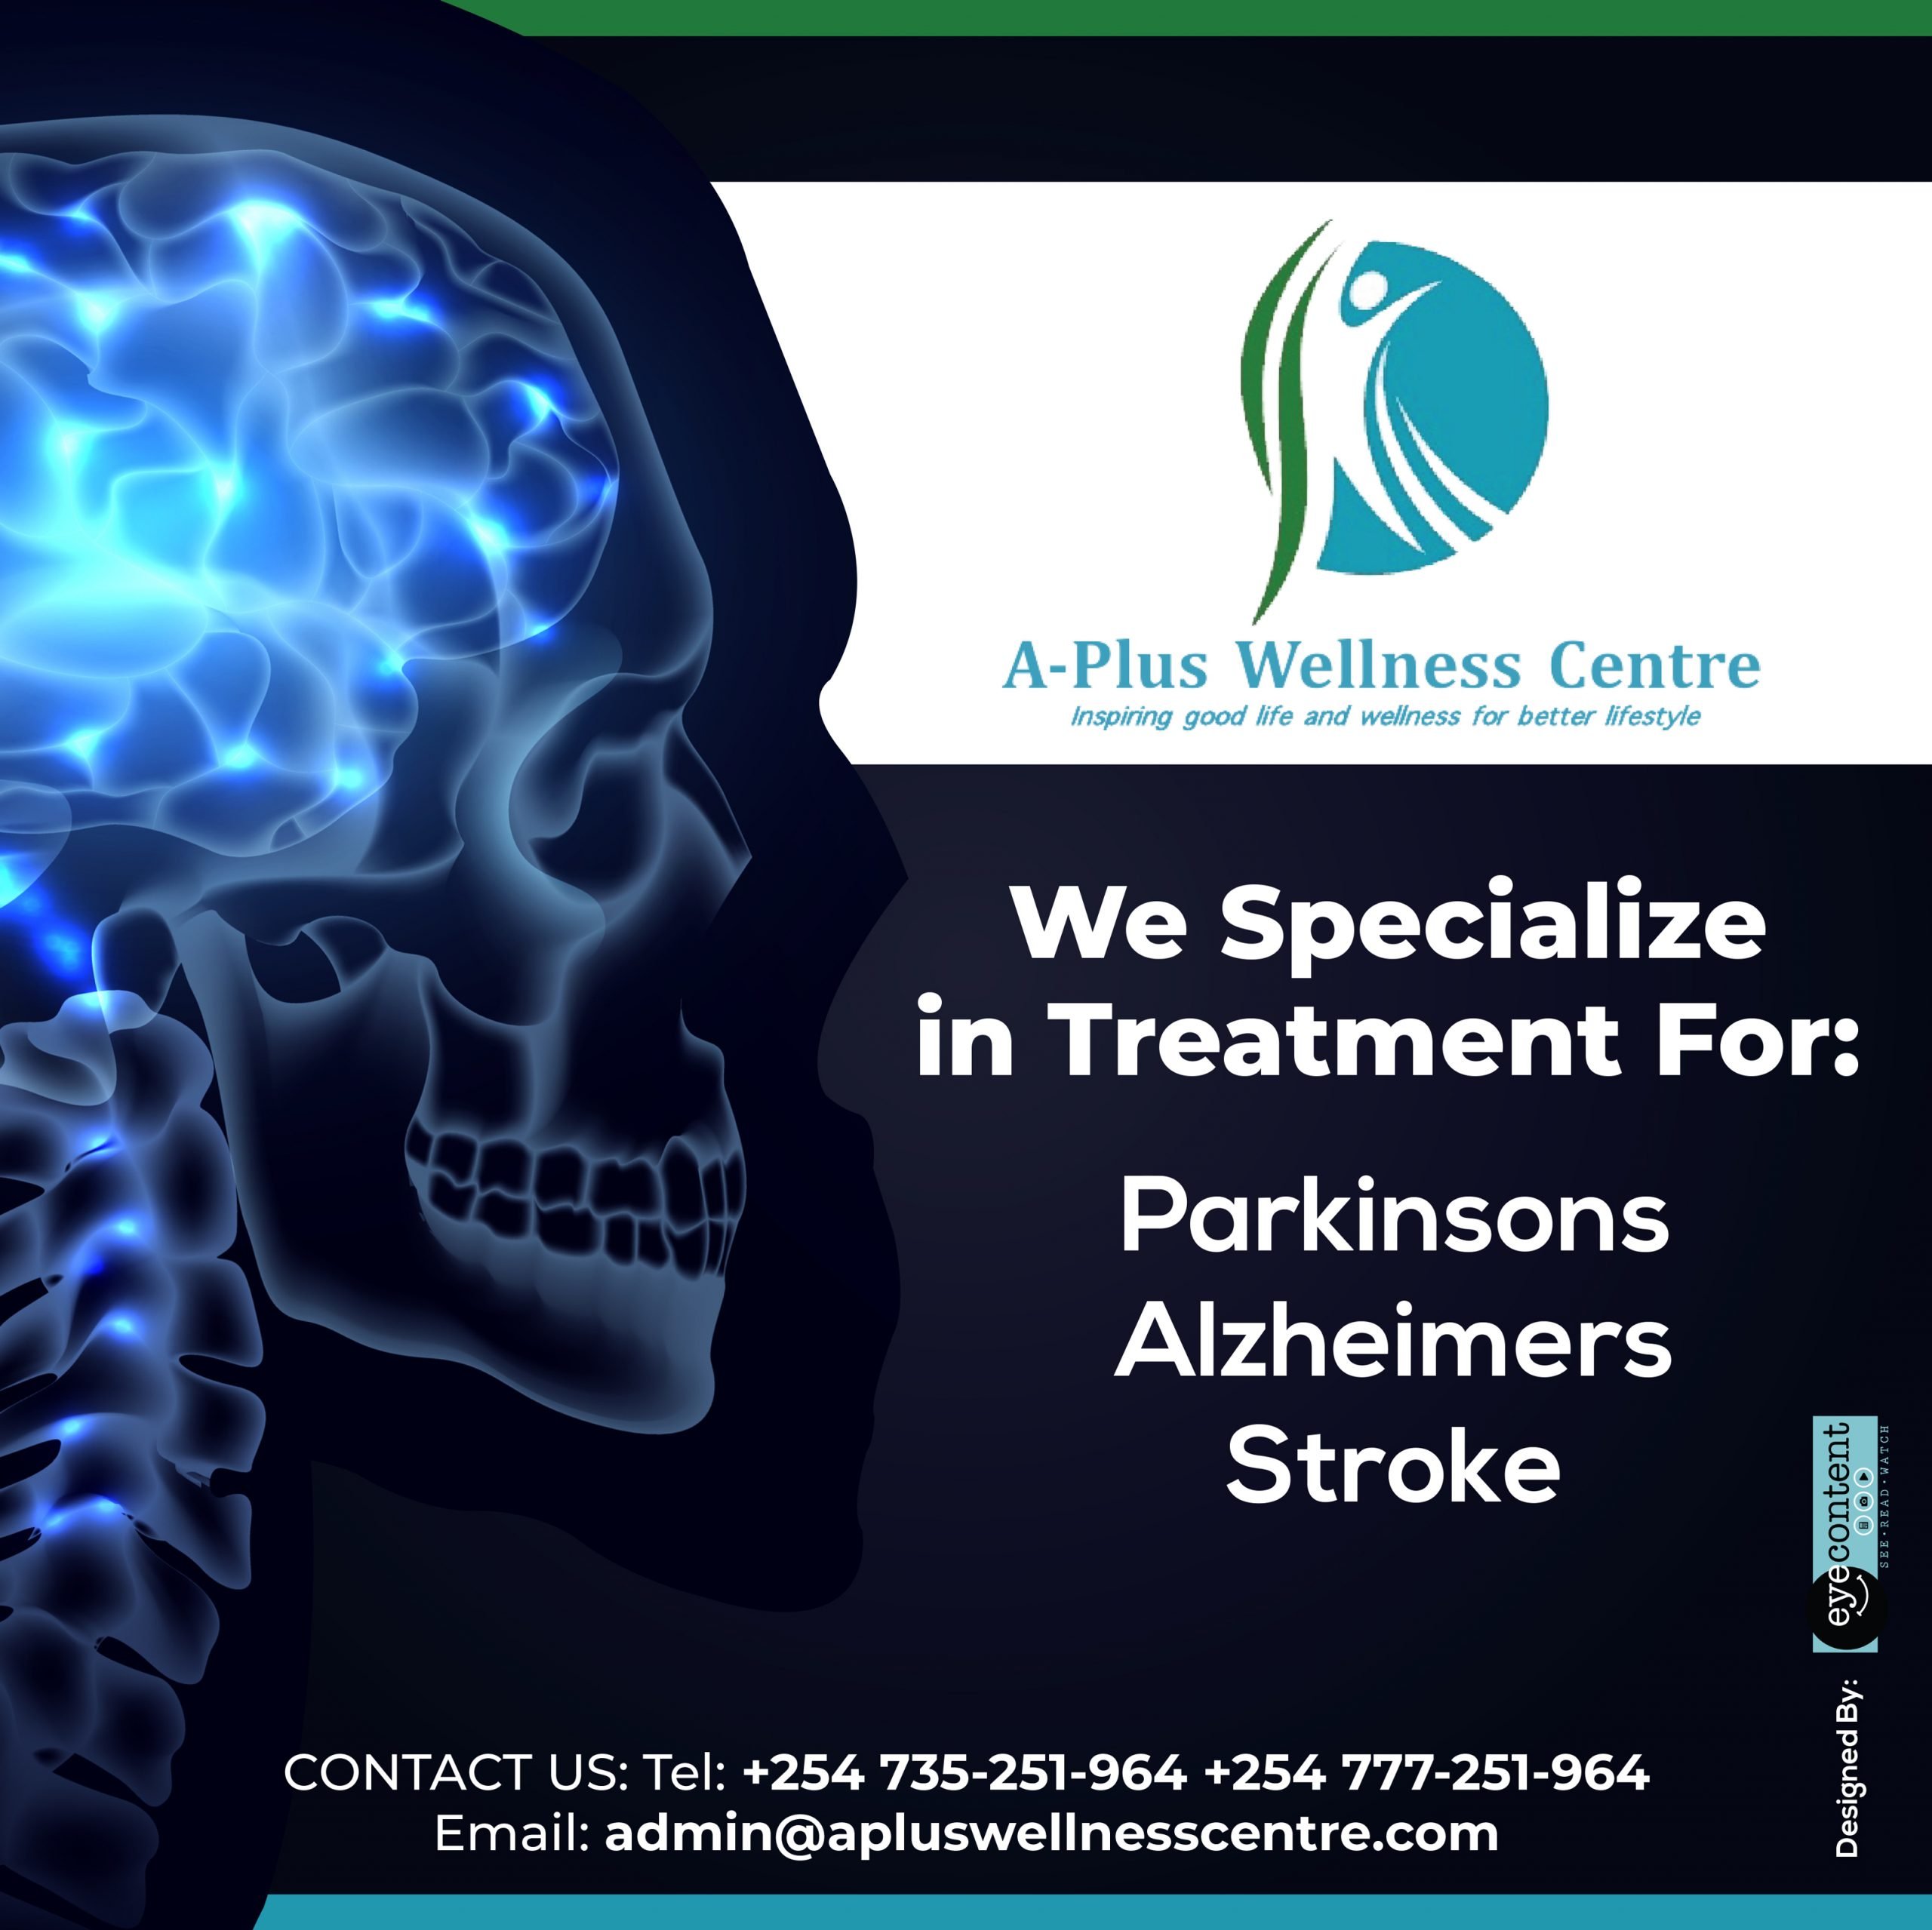 Treatment for Parkinsons, Alzheimers and Stroke with A Plus Wellness ...